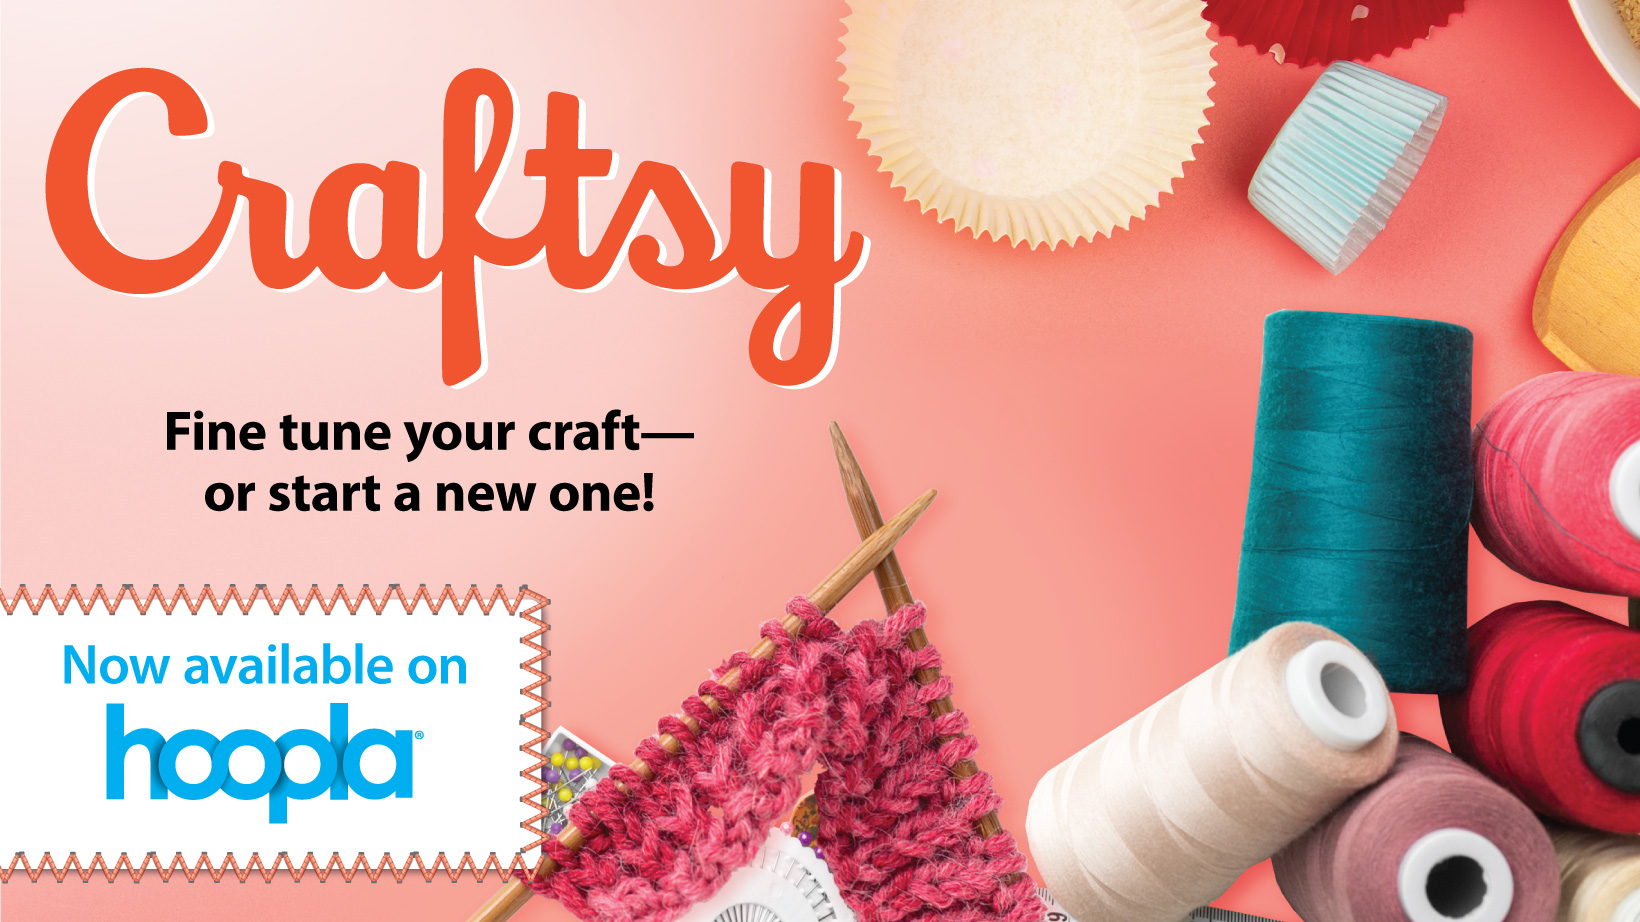 A pink background with yarn, ribbon, and other crafting materials with the title "Craftsy"